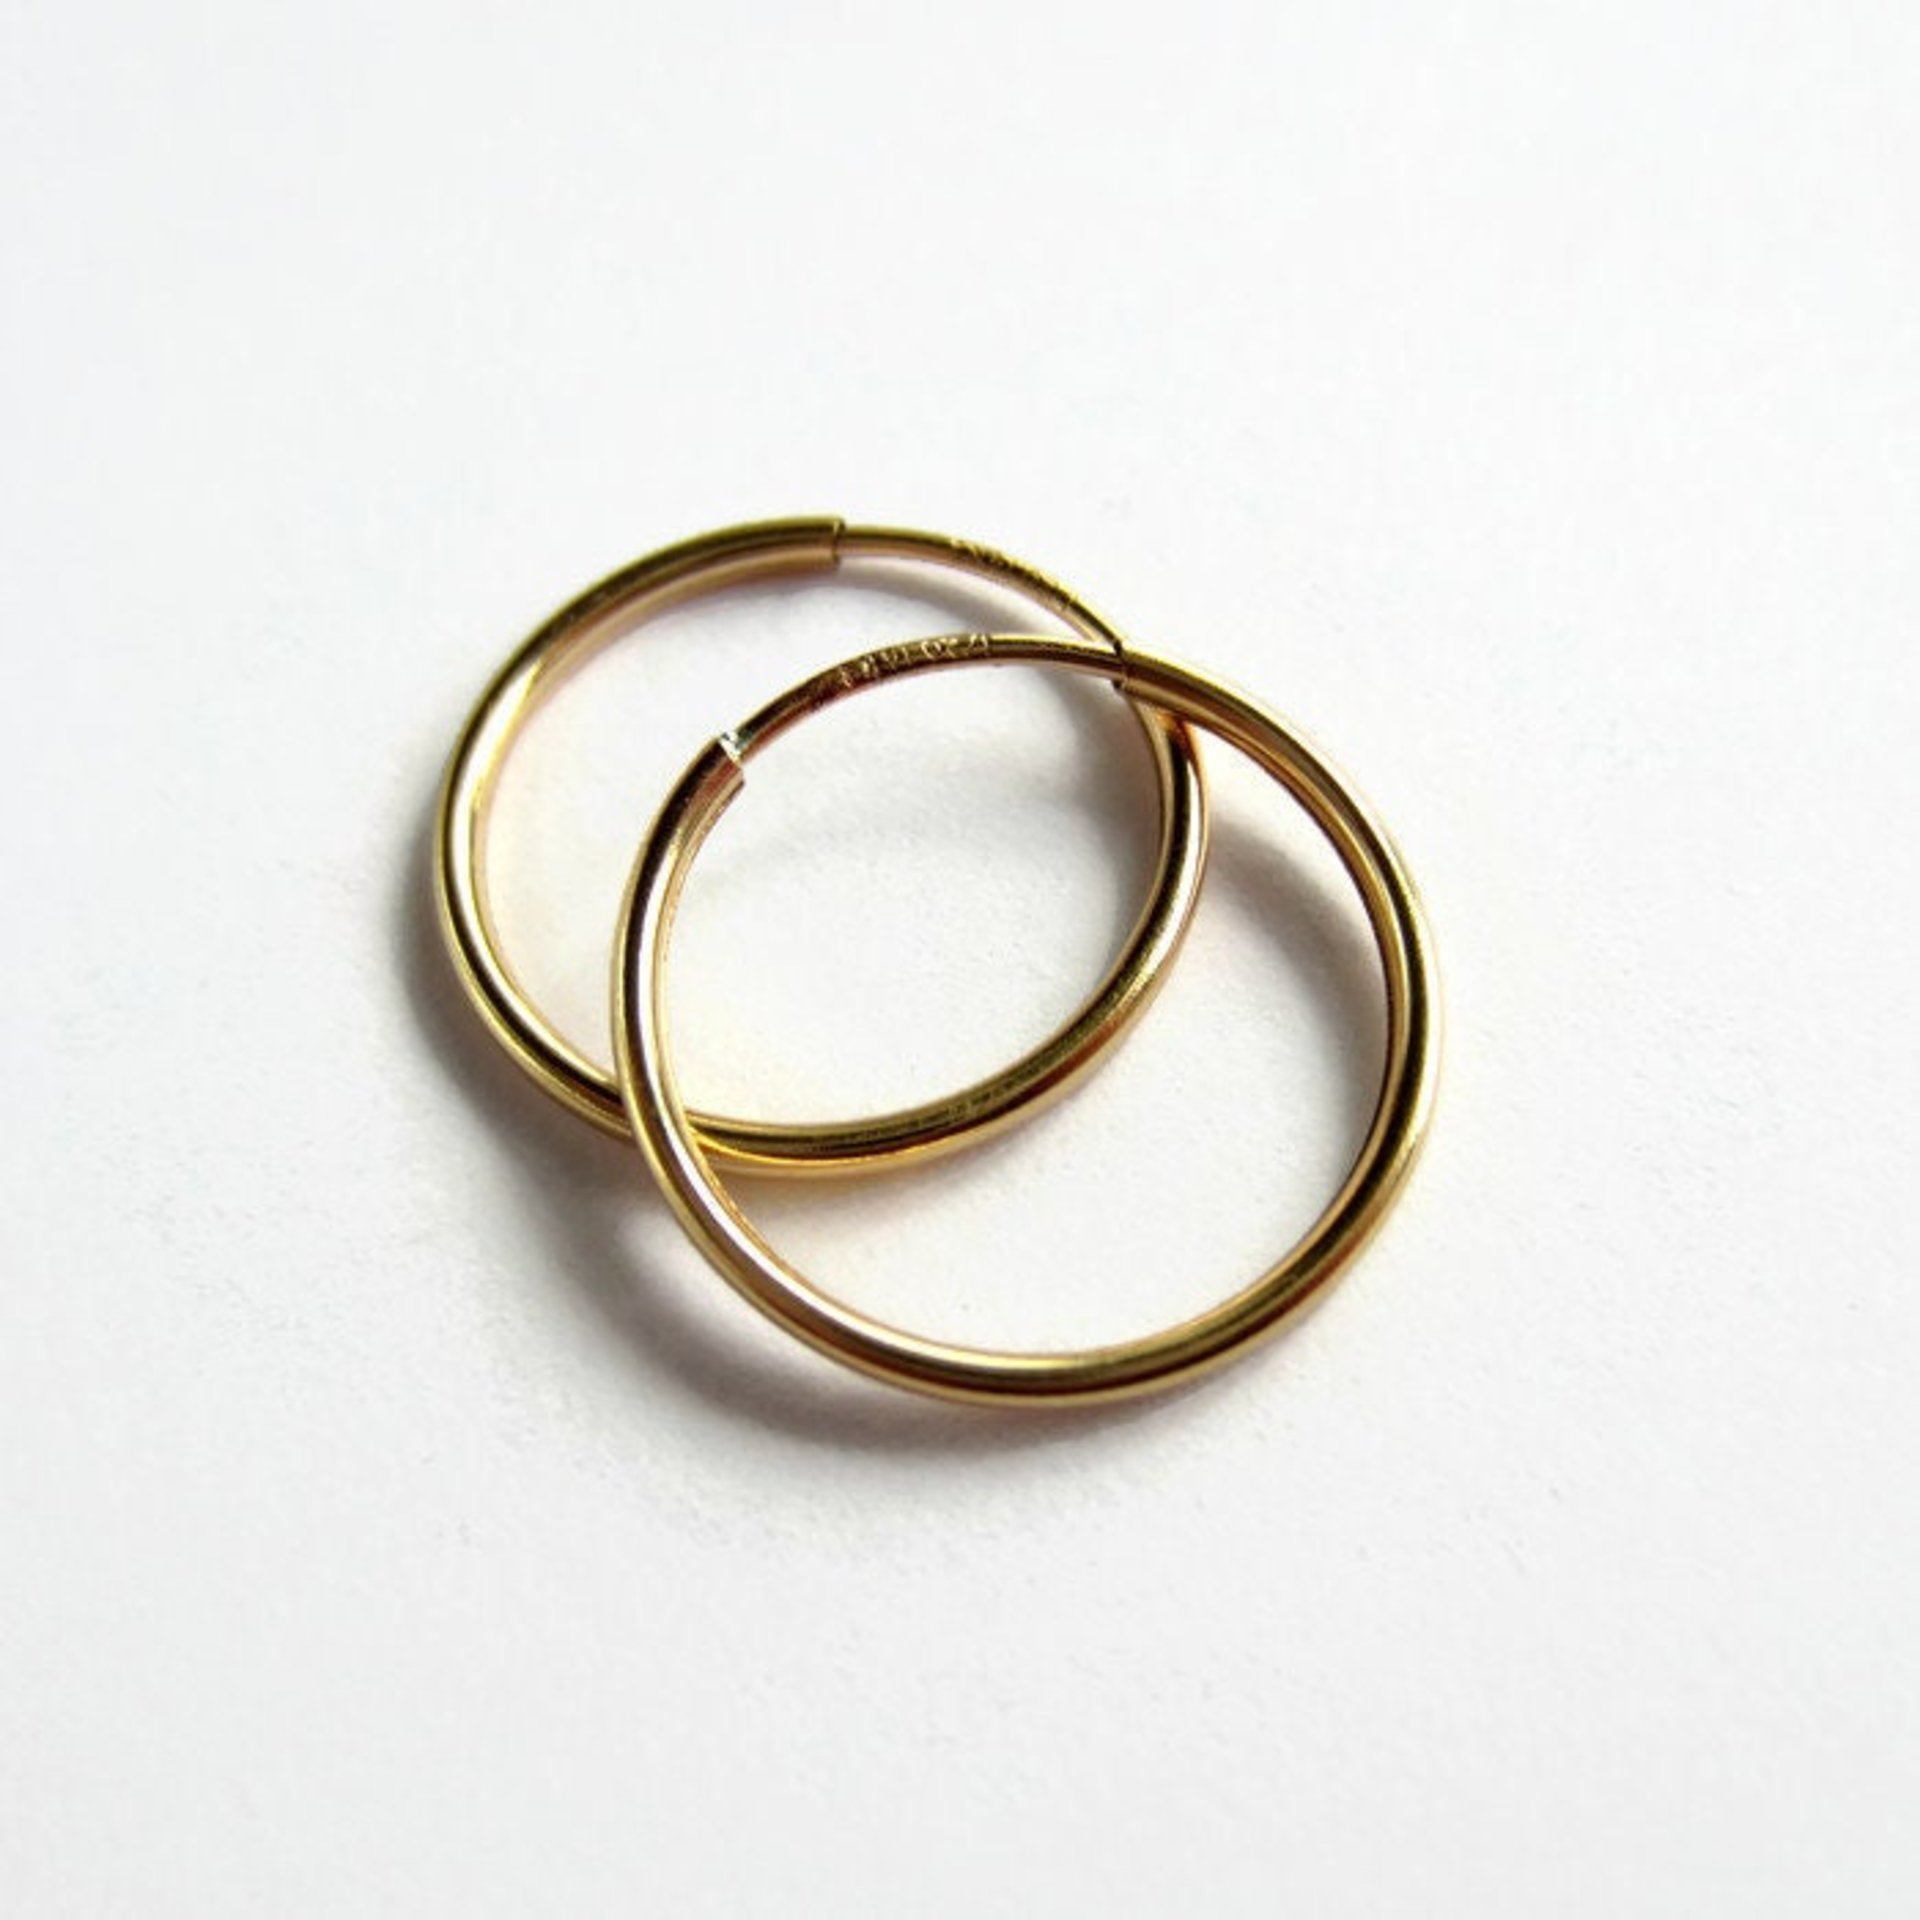 Single or Pair of 14K 20mm Gold Filled Hoop Earrings ~ The Tiny Tree Frog Jewellery